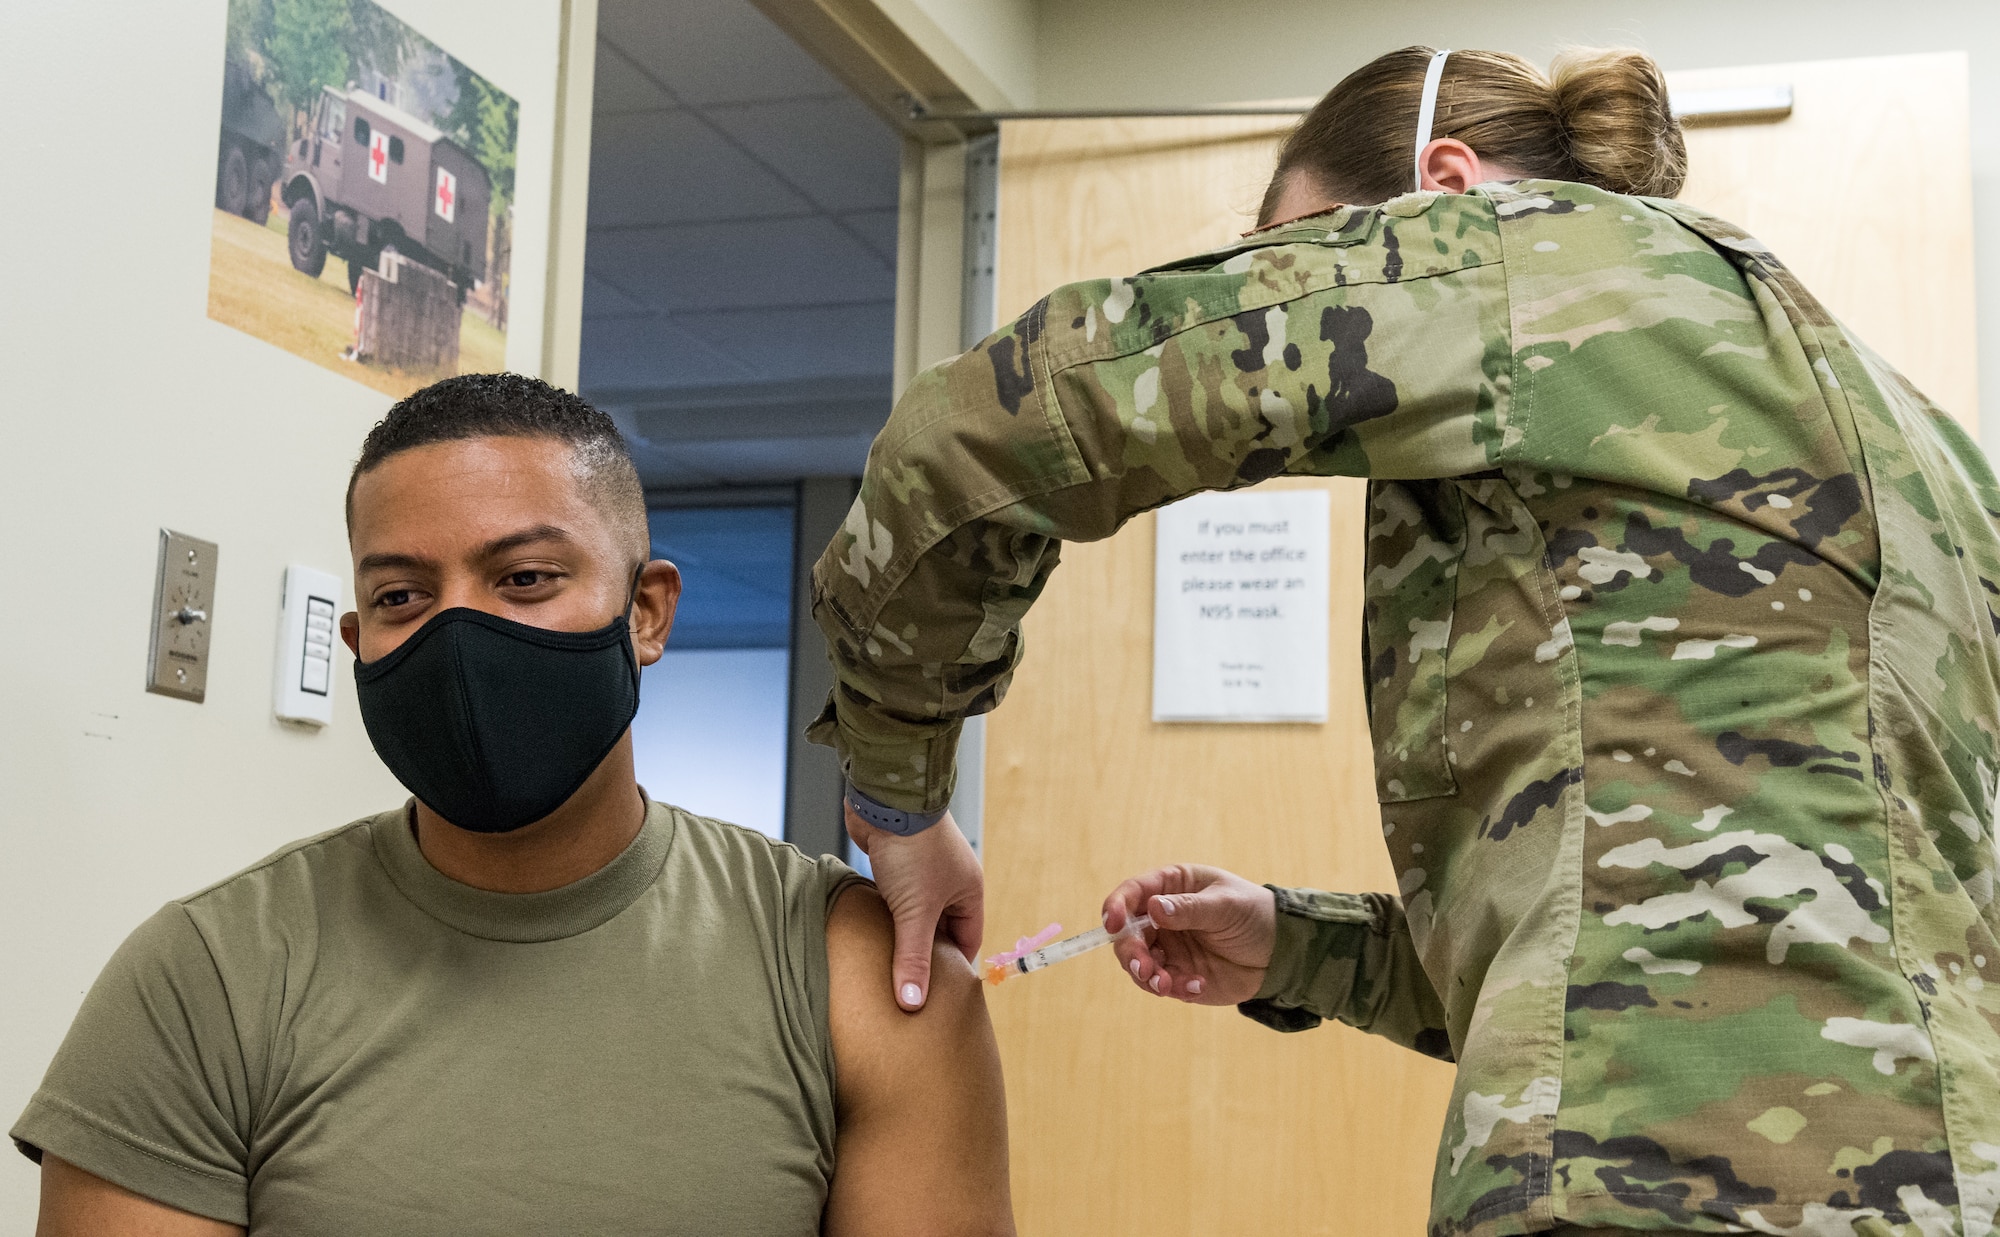 Master Sgt. Andrew Burgos, 436th Operational Medical Readiness Squadron mental health flight chief, receives the COVID-19 vaccine administered by Staff Sgt. Kelsey Loeser, 436th Medical Group unit training manager, Jan. 22, 2021, at Dover Air Force Base, Delaware. Burgos was among the first Team Dover front-line workers who voluntarily received the vaccine in accordance with Department of Defense guidance. The vaccine was granted emergency use authorization by the U.S. Food and Drug Administration for use in prevention of COVID-19. (U.S. Air Force photo by Roland Balik)